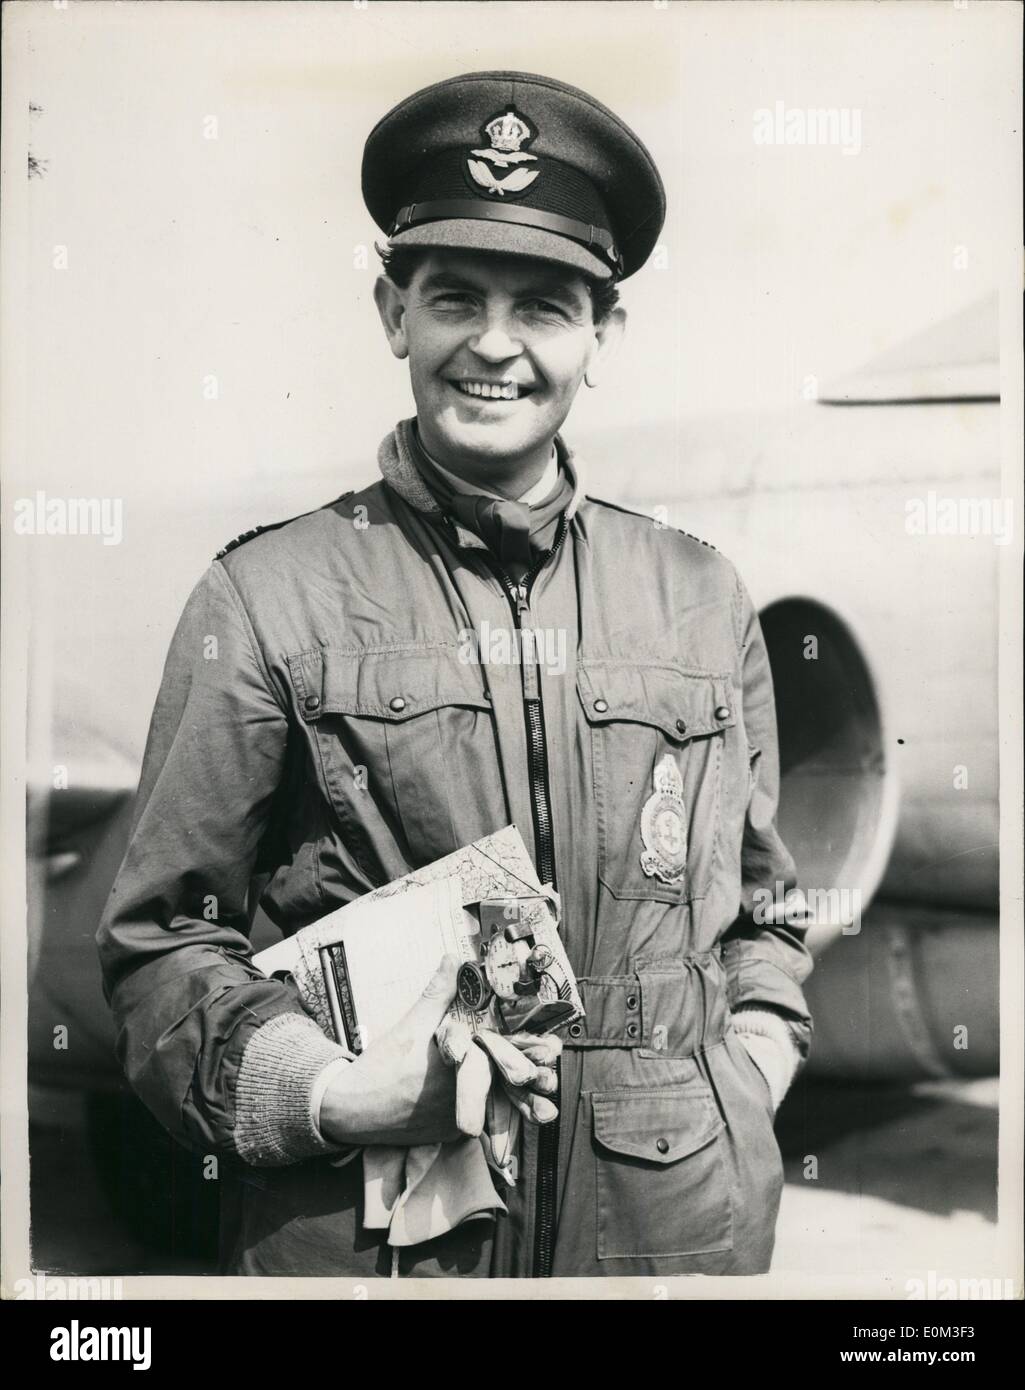 May 05, 1953 - R.A.F. Rehearse Their Coronation Day Fly Past Commander Wallace - The Leader: Affirmation of 168 Jet Fighter aircraft - were to be seen today rehearsing their Coronation Day Fly Past from Biggin Hill, Kent. Photo shows Wing Commander James Wallec D.S.O., D.F.C., who is to lead Squadron during the fly Past - poses for the cameras - at Biggin Hill today. Stock Photo